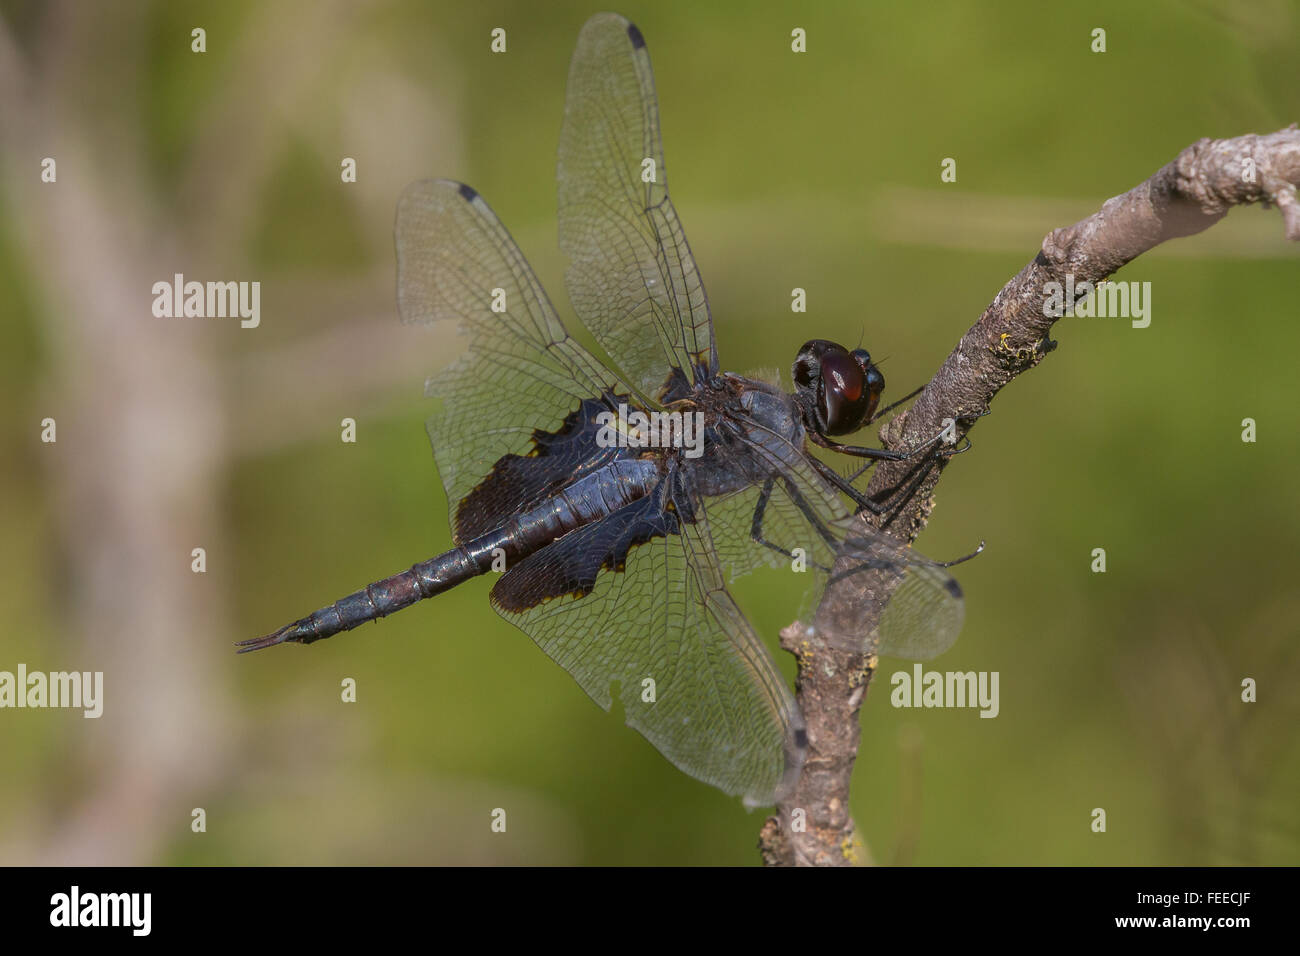 A male Black Saddlebags, Tramea lacerata, perched on a branch Stock Photo